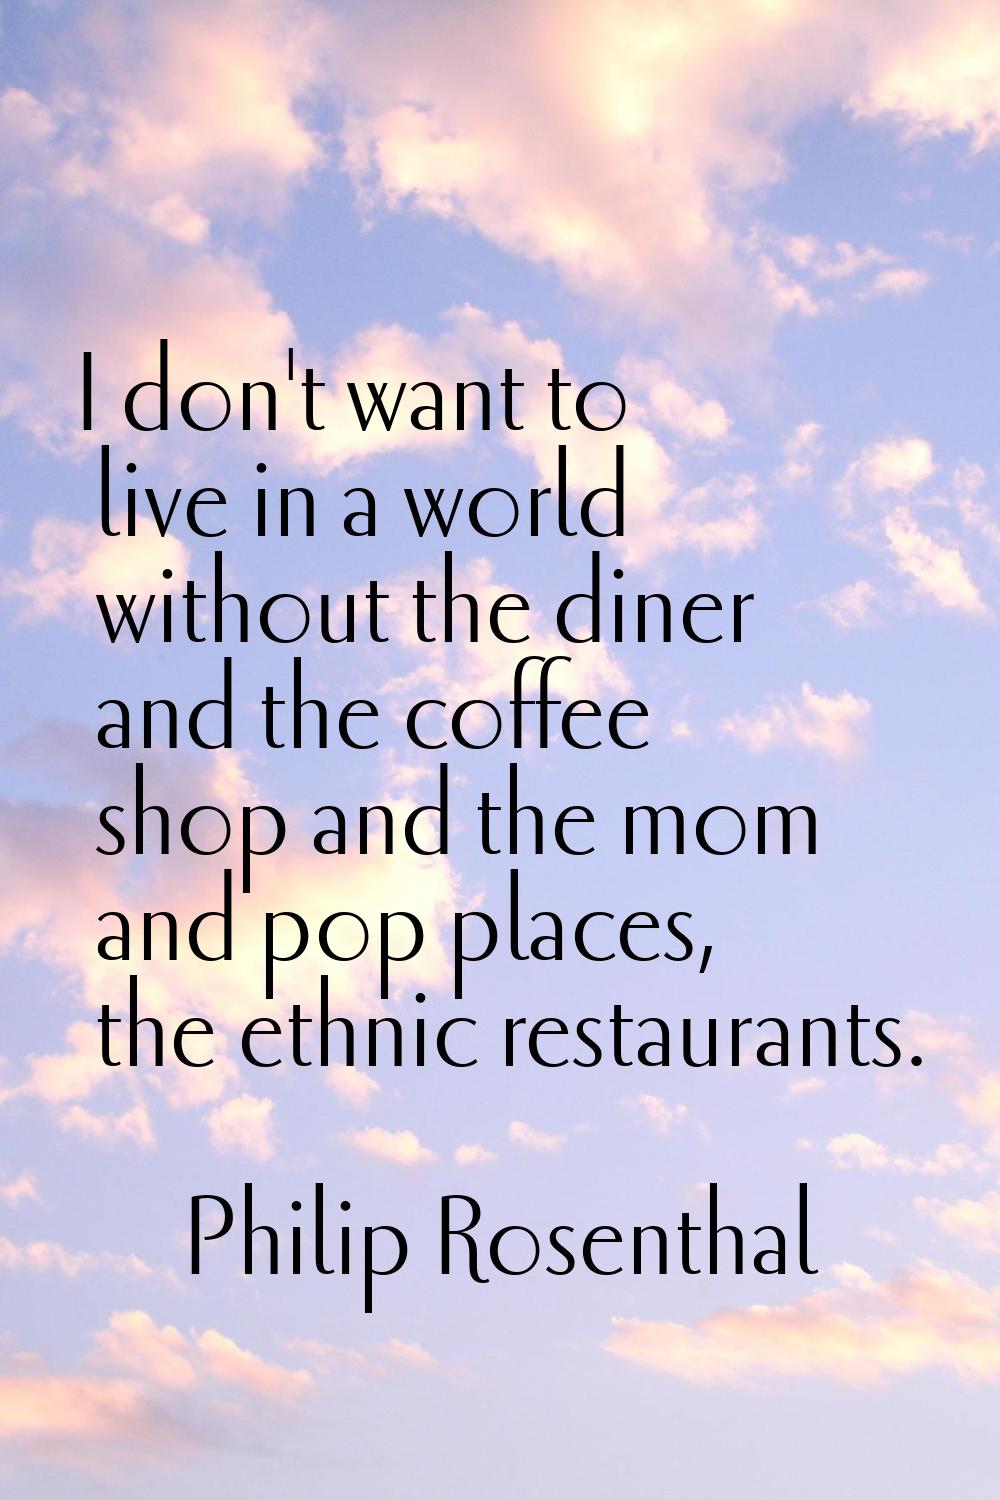 I don't want to live in a world without the diner and the coffee shop and the mom and pop places, t